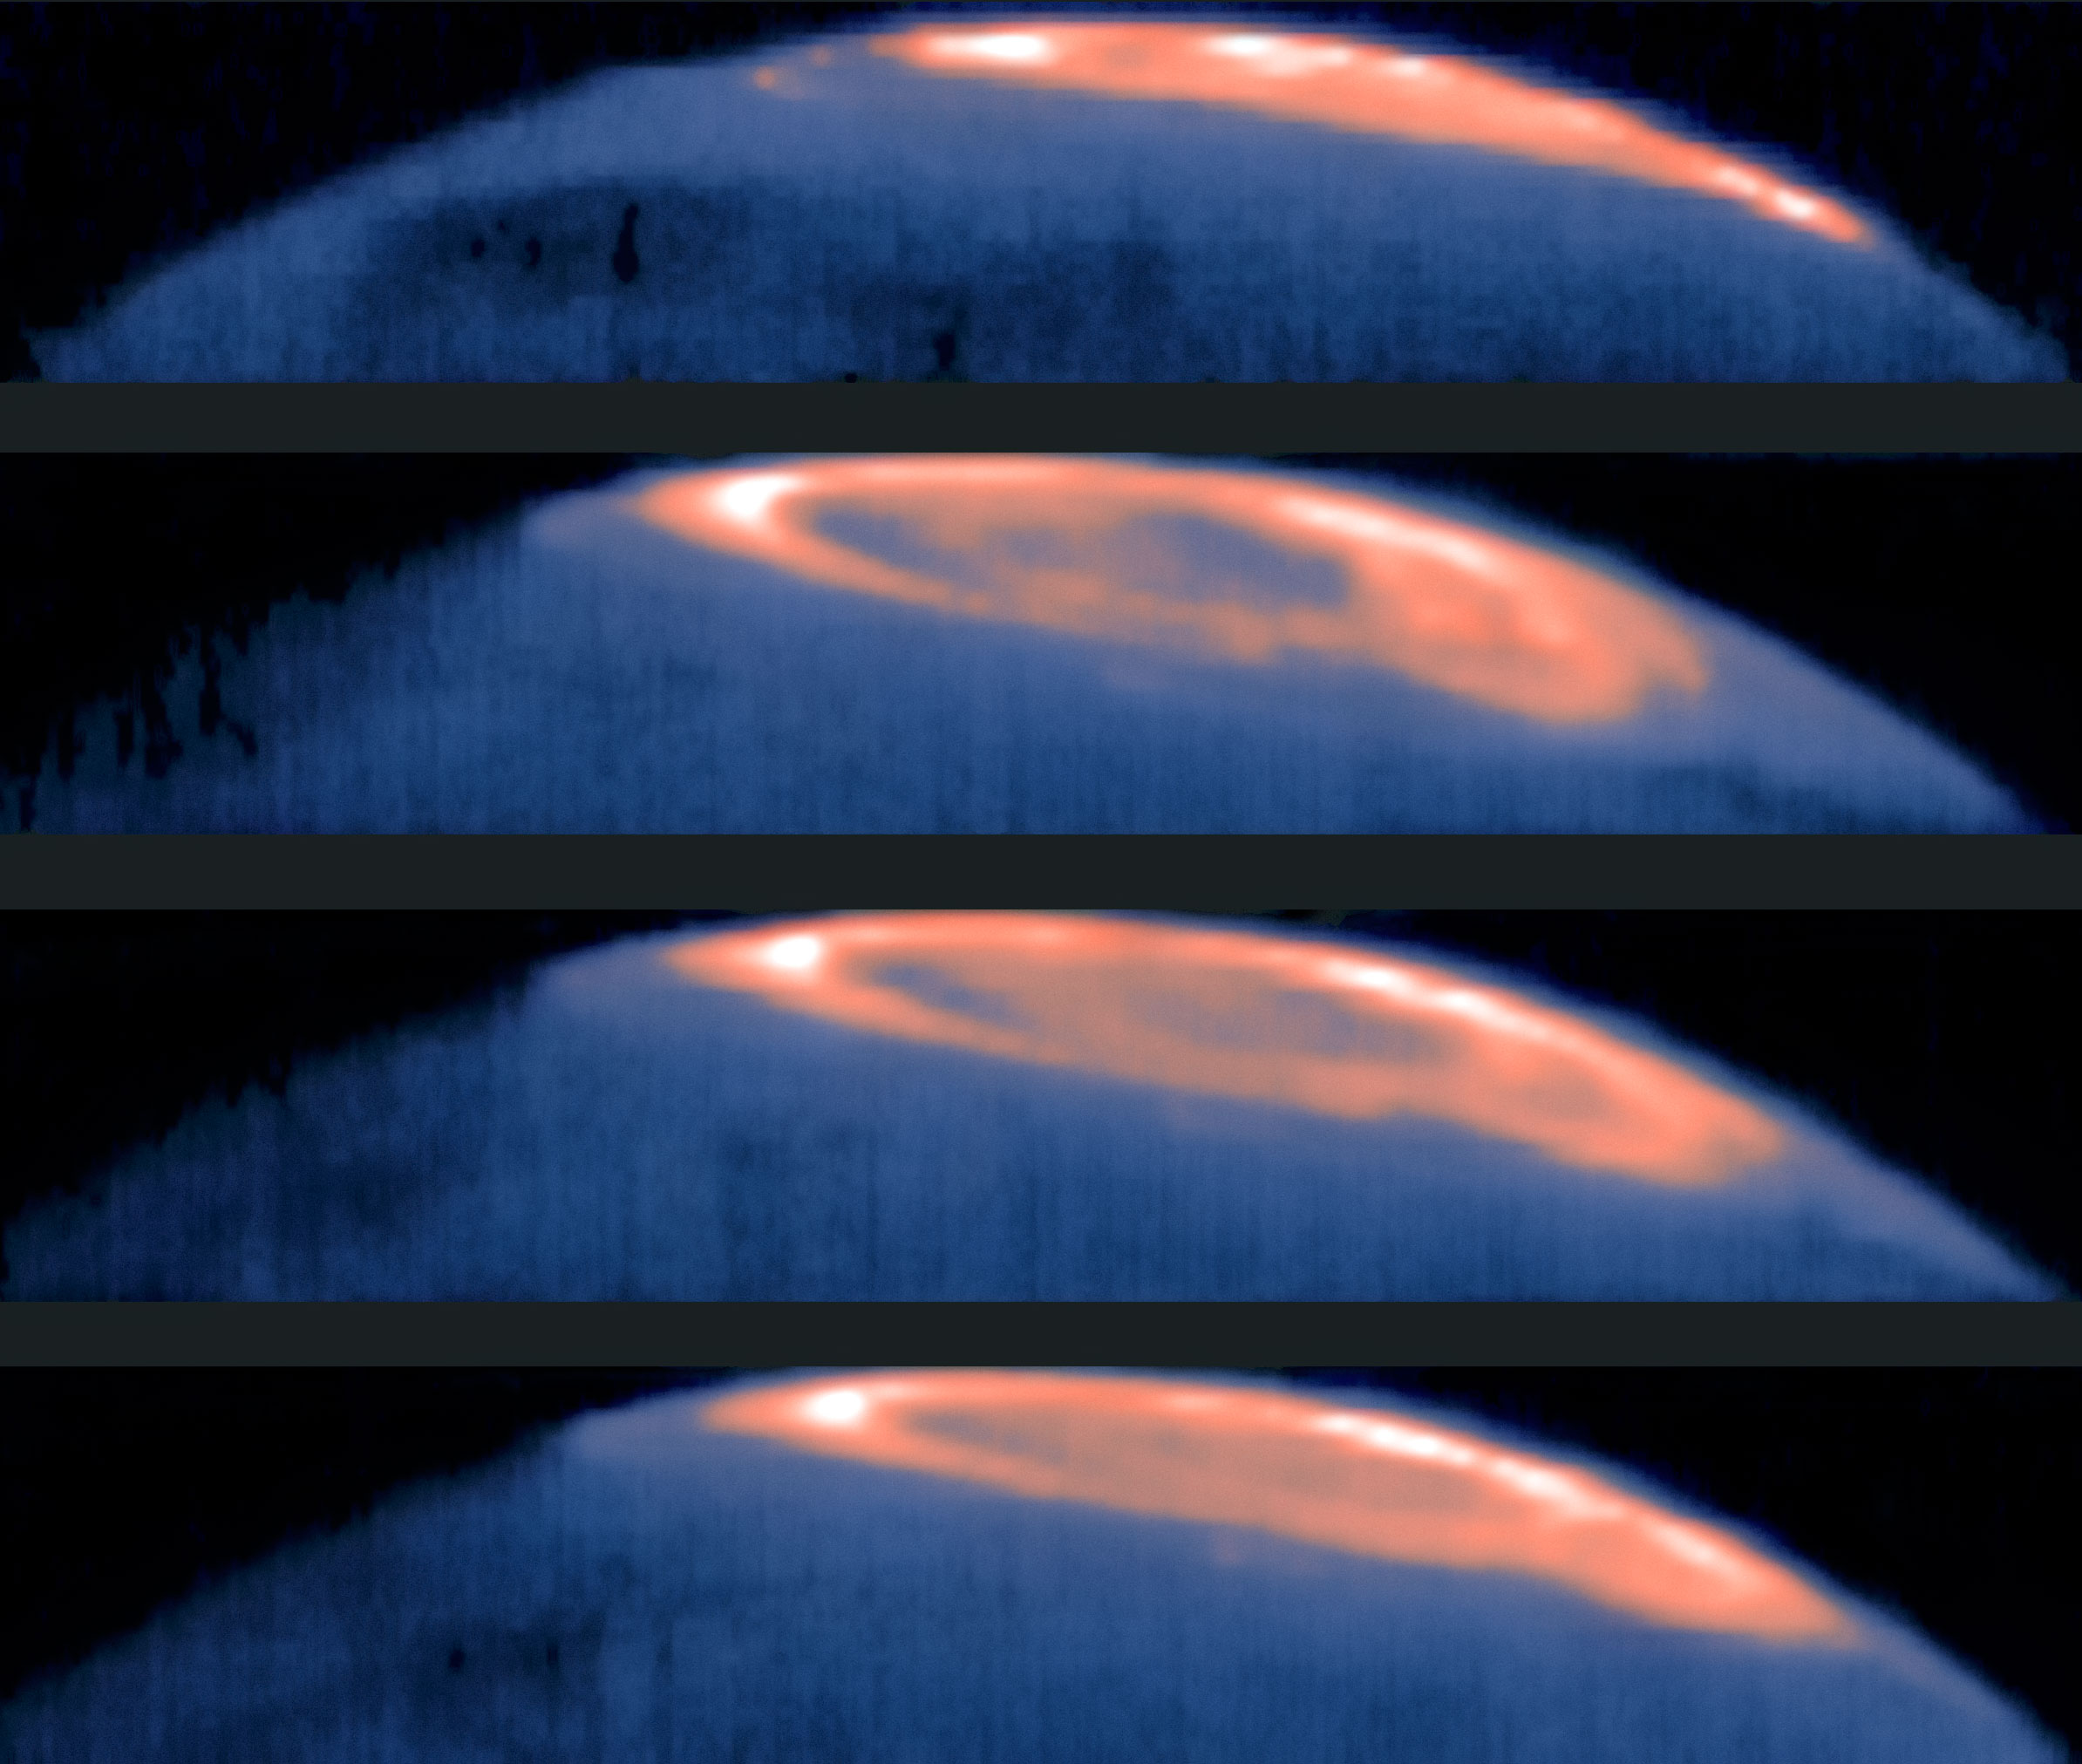 ESO Astronomers View a Great Cold Spot on Jupiter